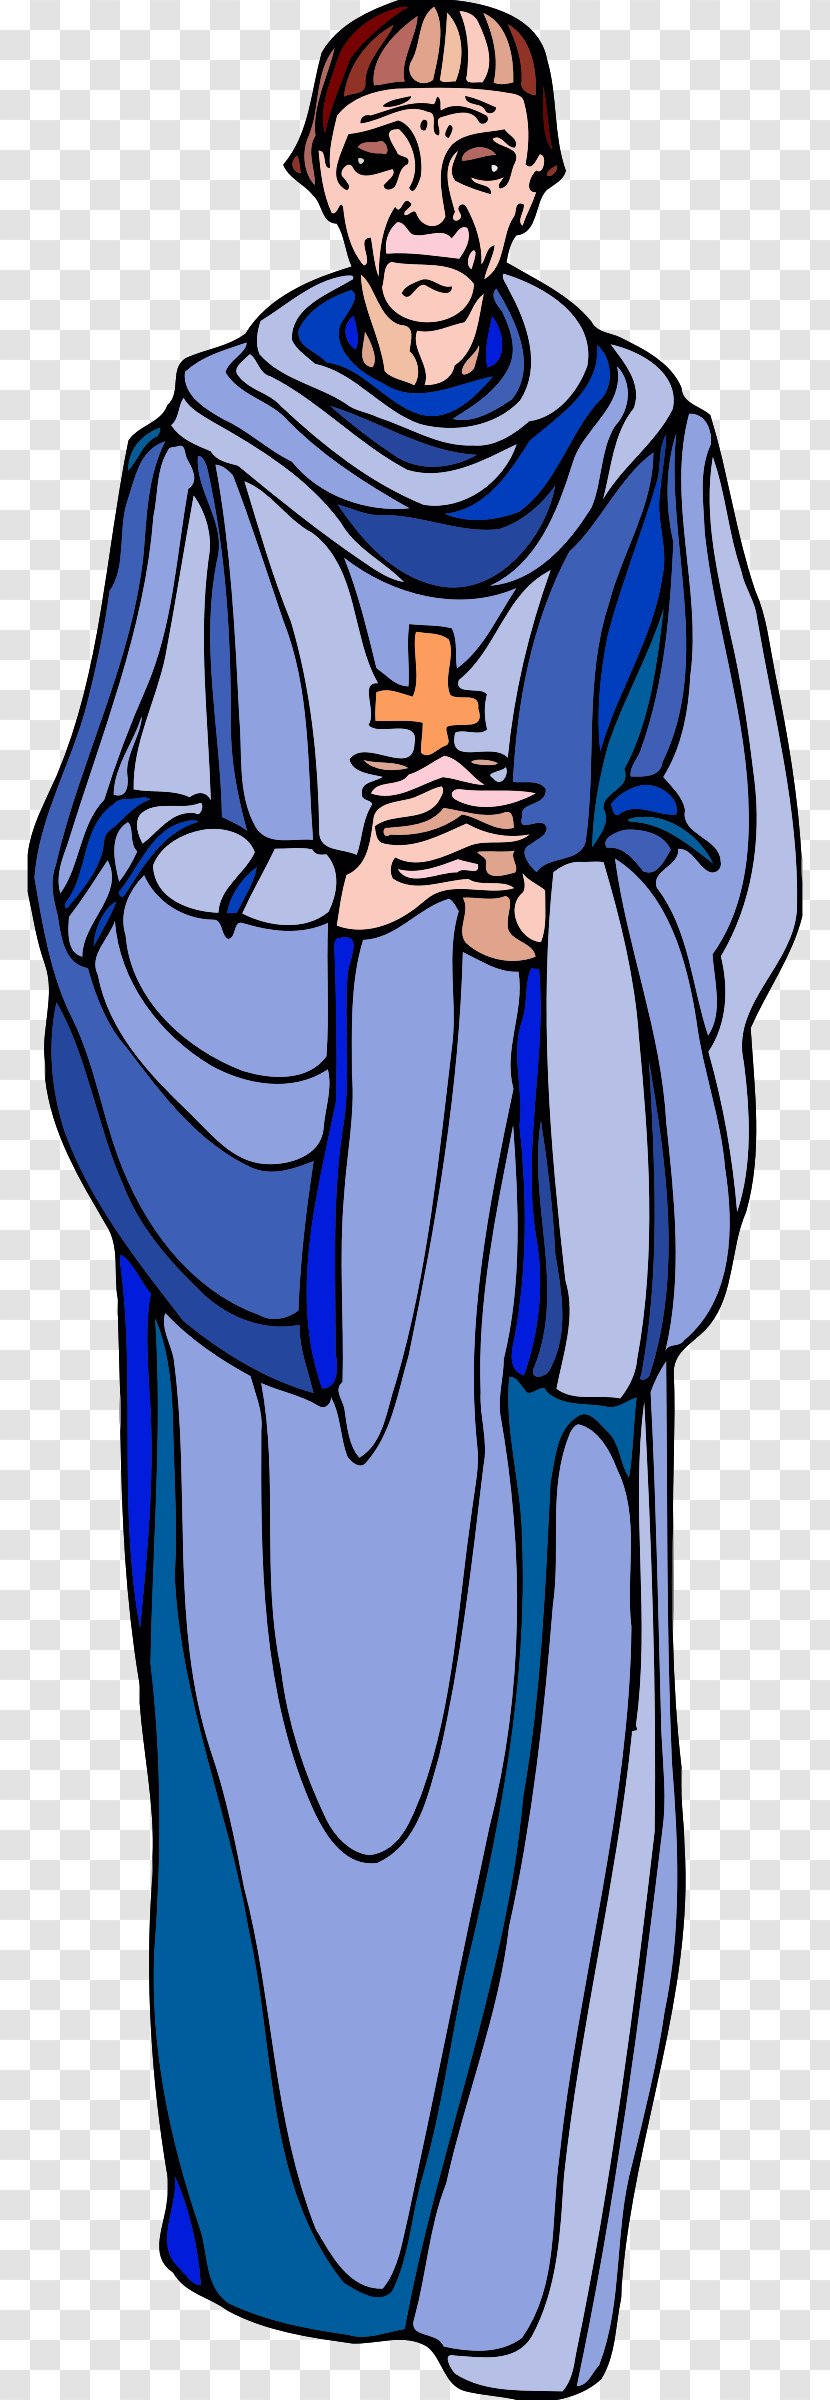 Romeo And Juliet Character Clip Art - Drama - Priest Transparent PNG